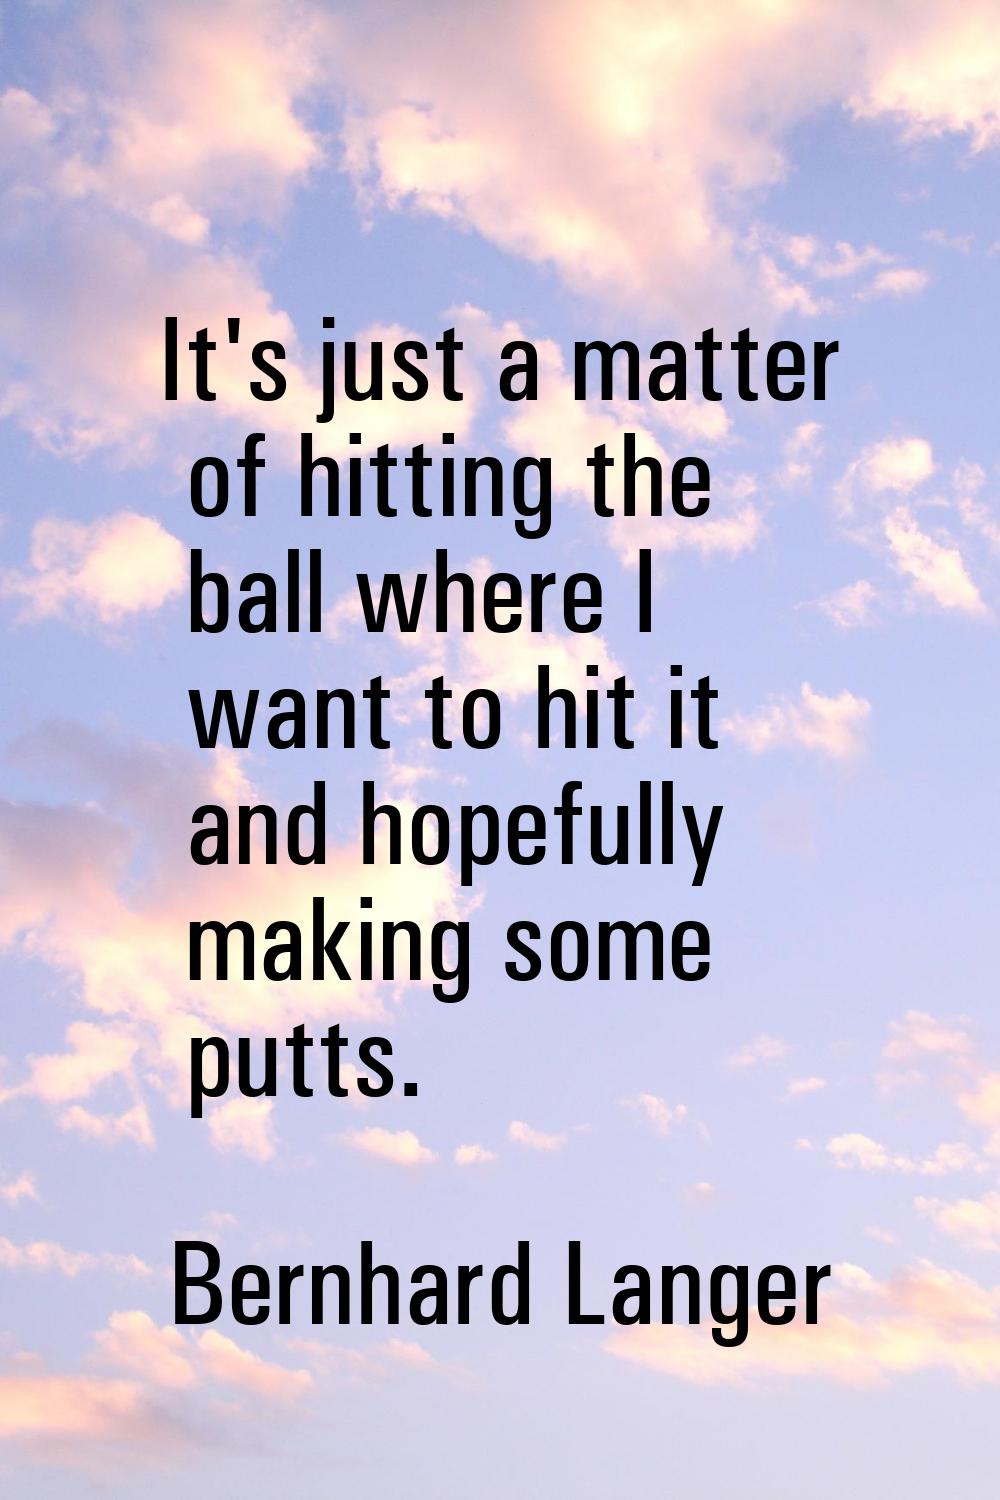 It's just a matter of hitting the ball where I want to hit it and hopefully making some putts.